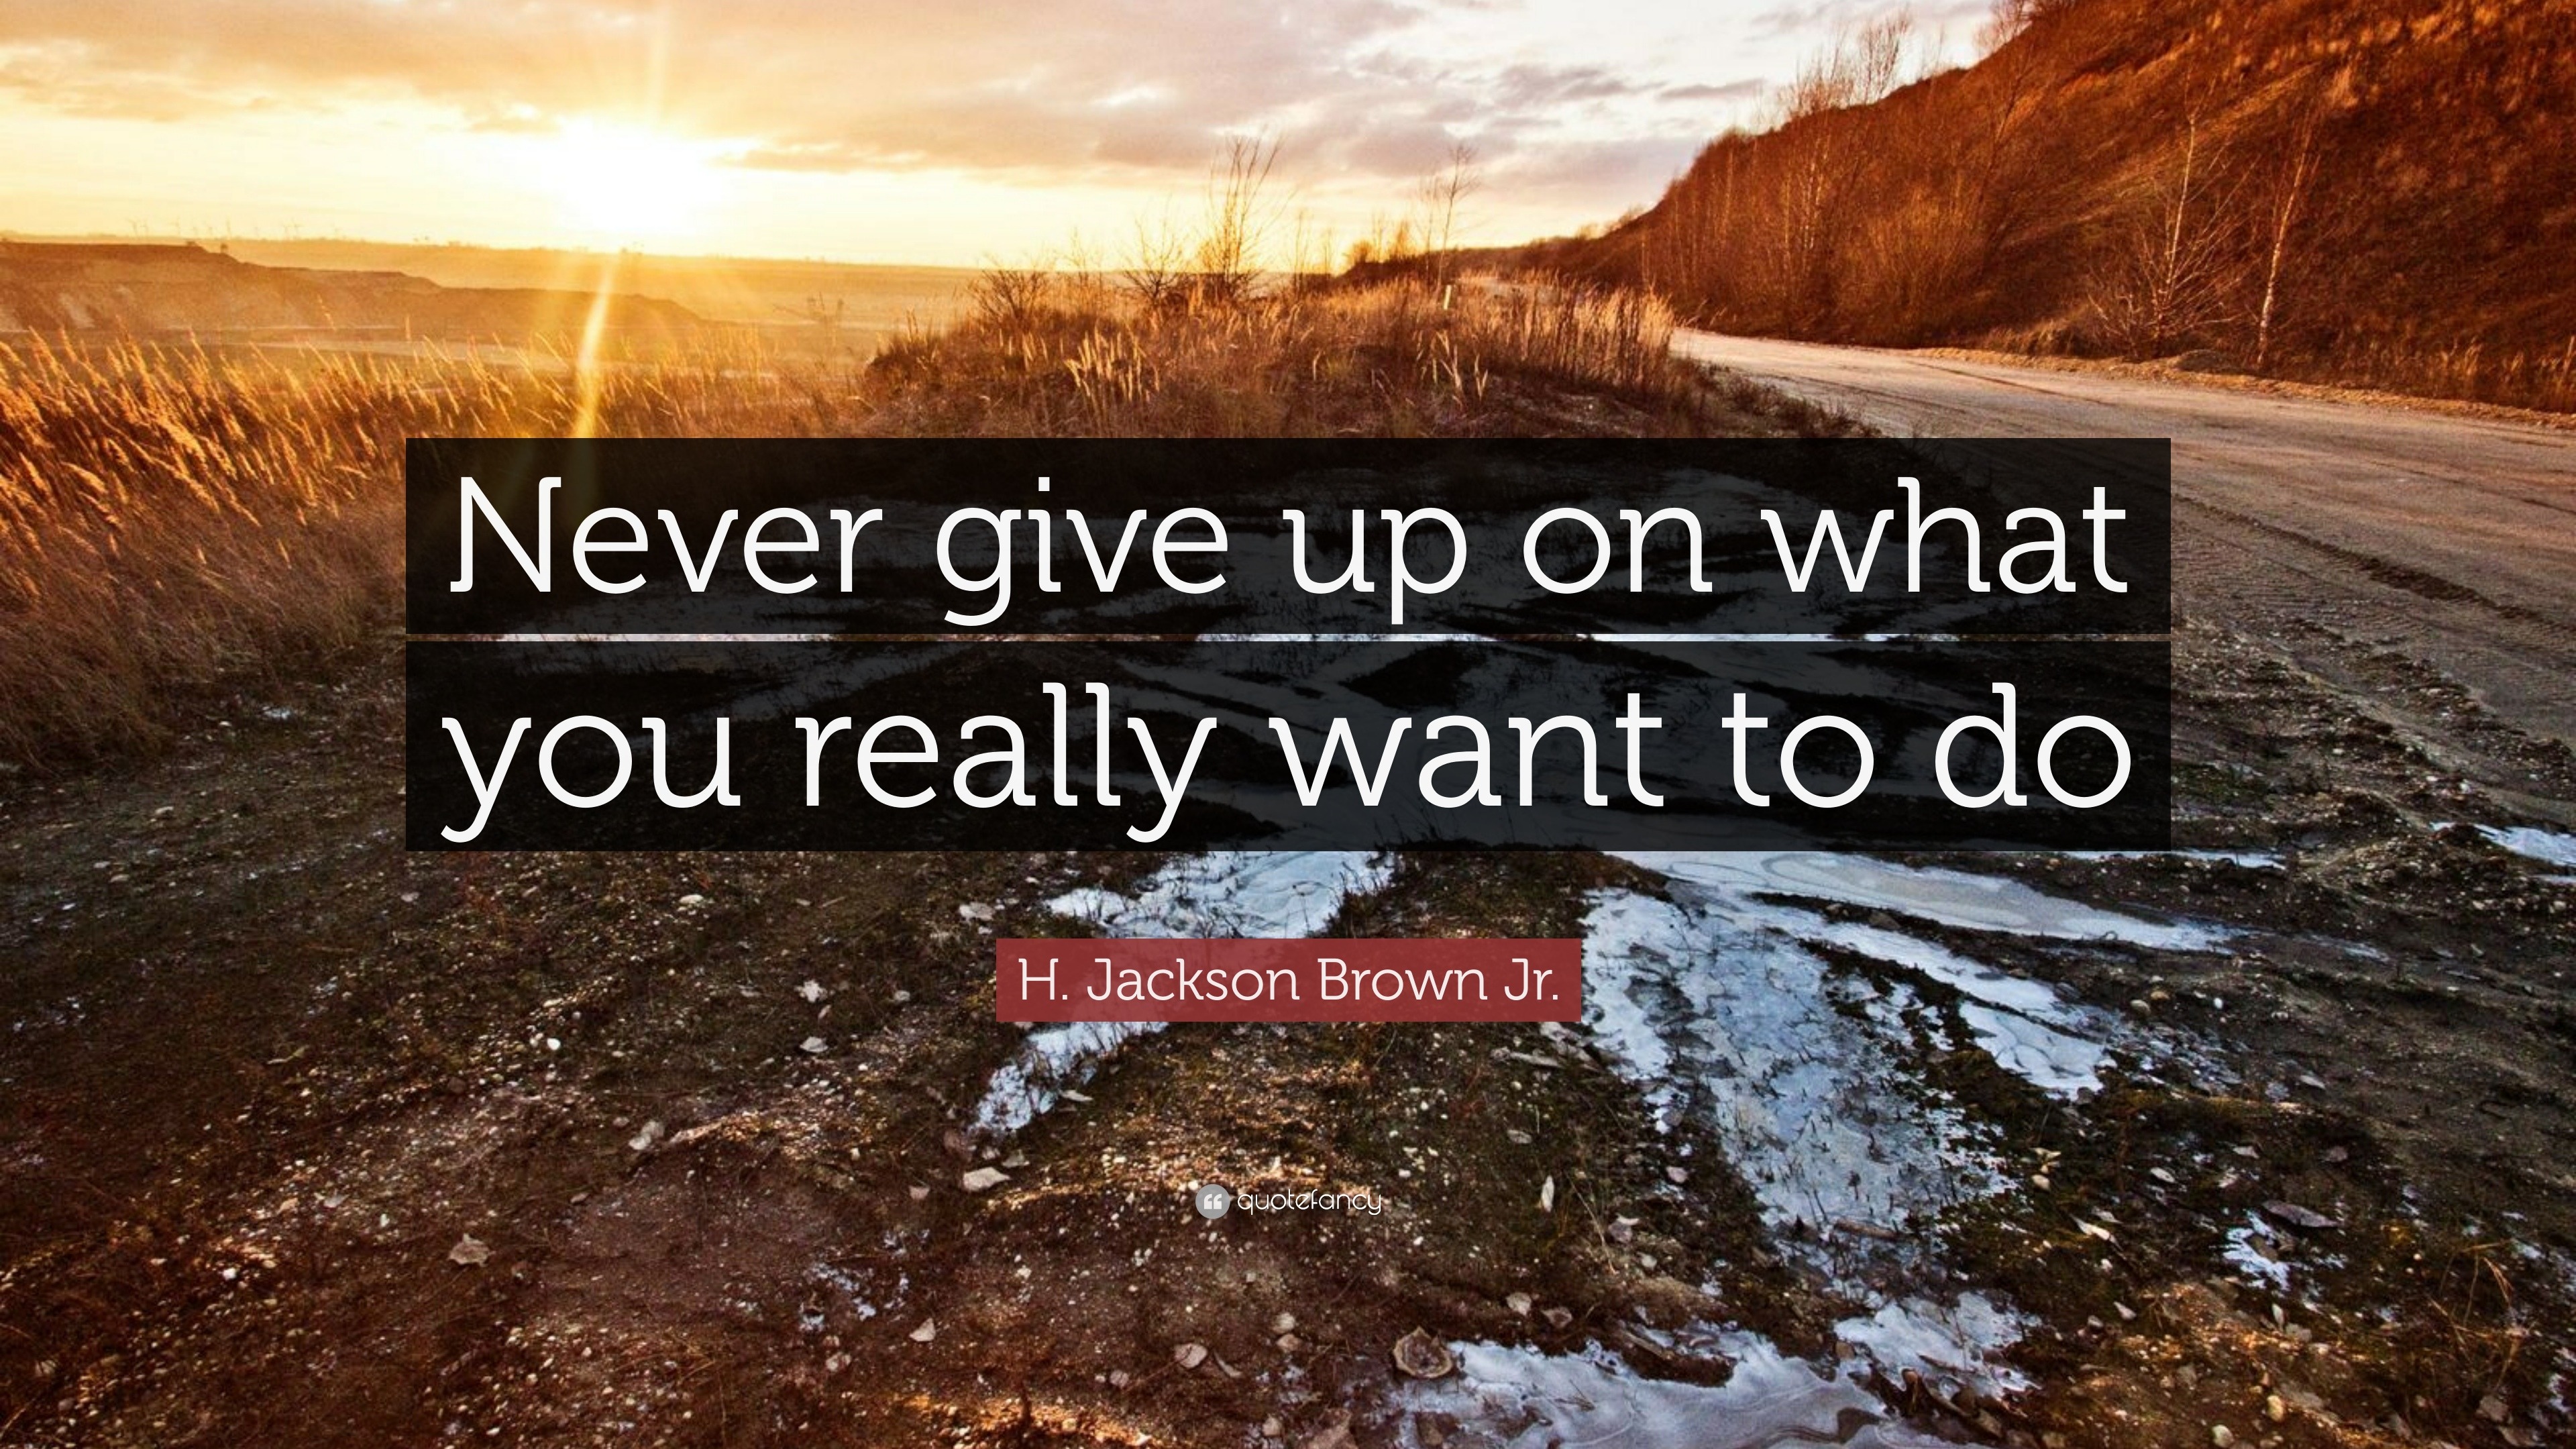 H. Jackson Brown Jr. Quote: “Never give up on what you really want to do”